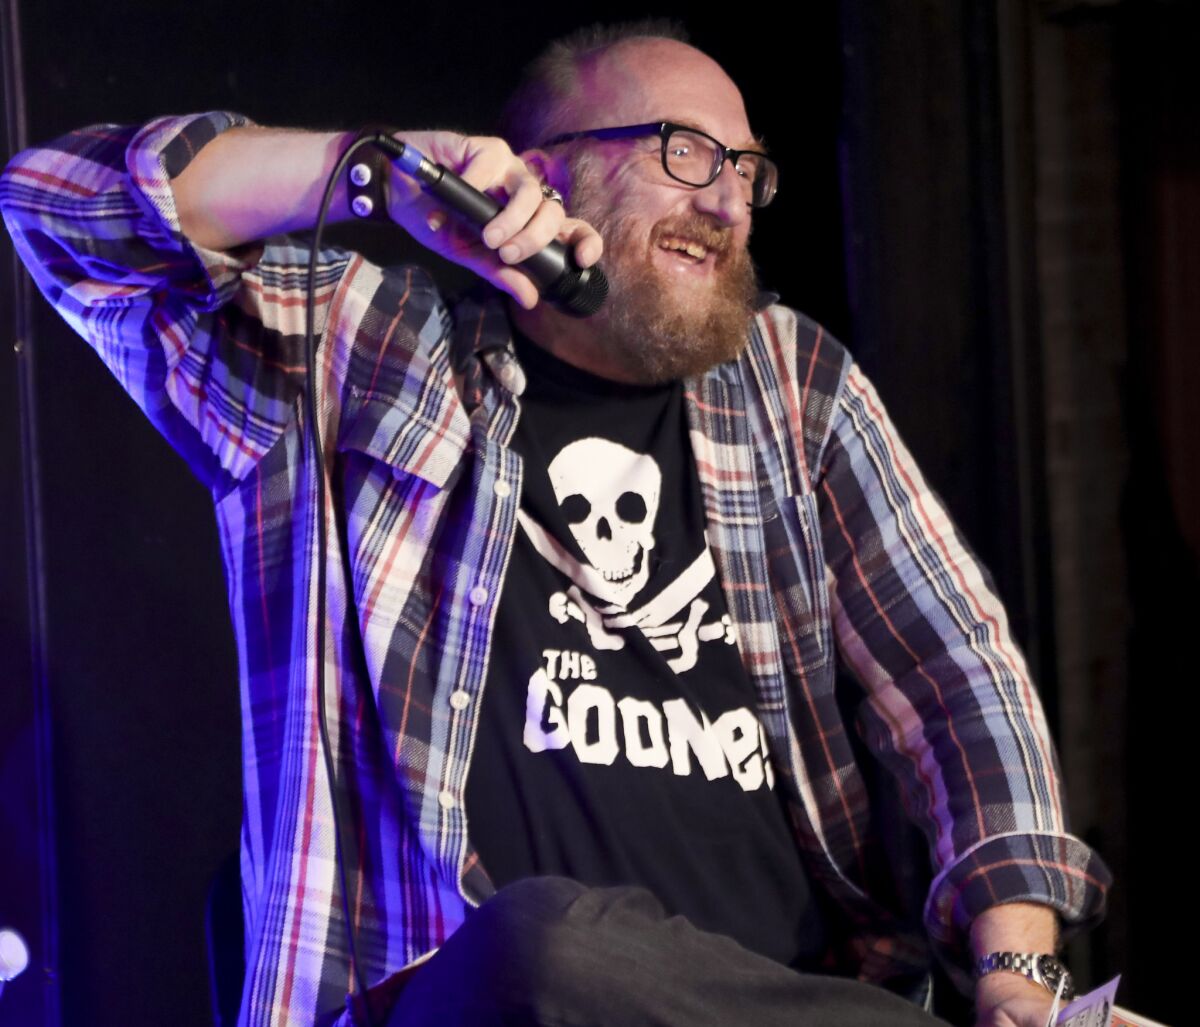 LOS ANGELES, CA - JUNE 01: Brian Posehn attends D&D Live From Meltdown Comics Comics and Collectibles on June 1, 2016 in Los Angeles, California. (Photo by Randy Shropshire/Getty Images for Wizards of the Coast)